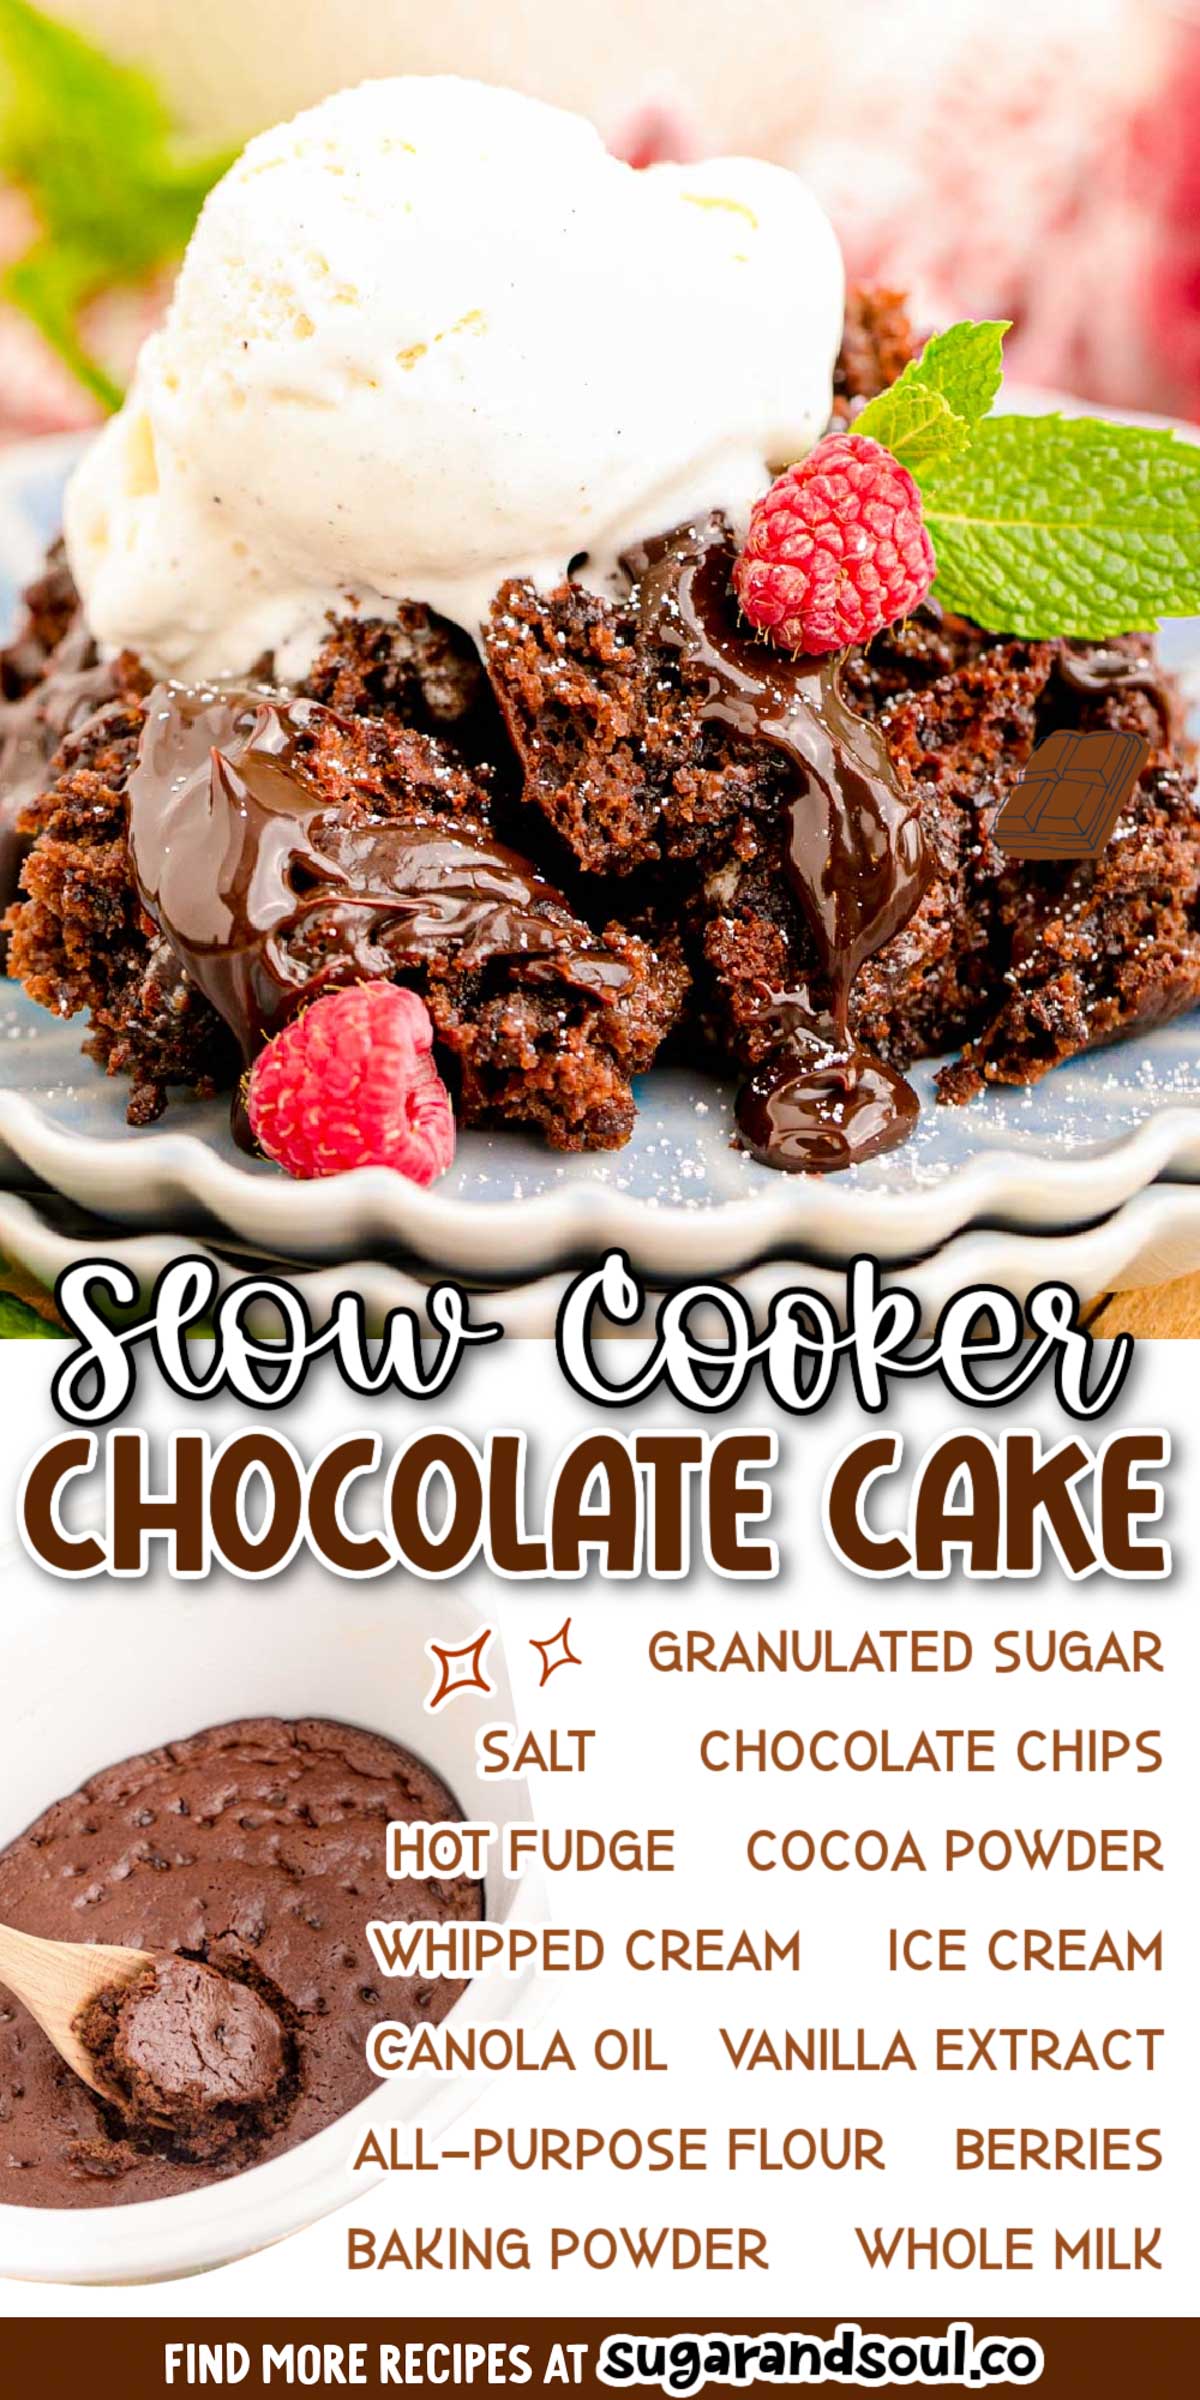 Crockpot Chocolate Cake is made from scratch using pantry staple ingredients and then topped with hot fudge, ice cream, and whipped cream! Takes just 15 minutes to prep and then your crock pot does the rest of the work! via @sugarandsoulco